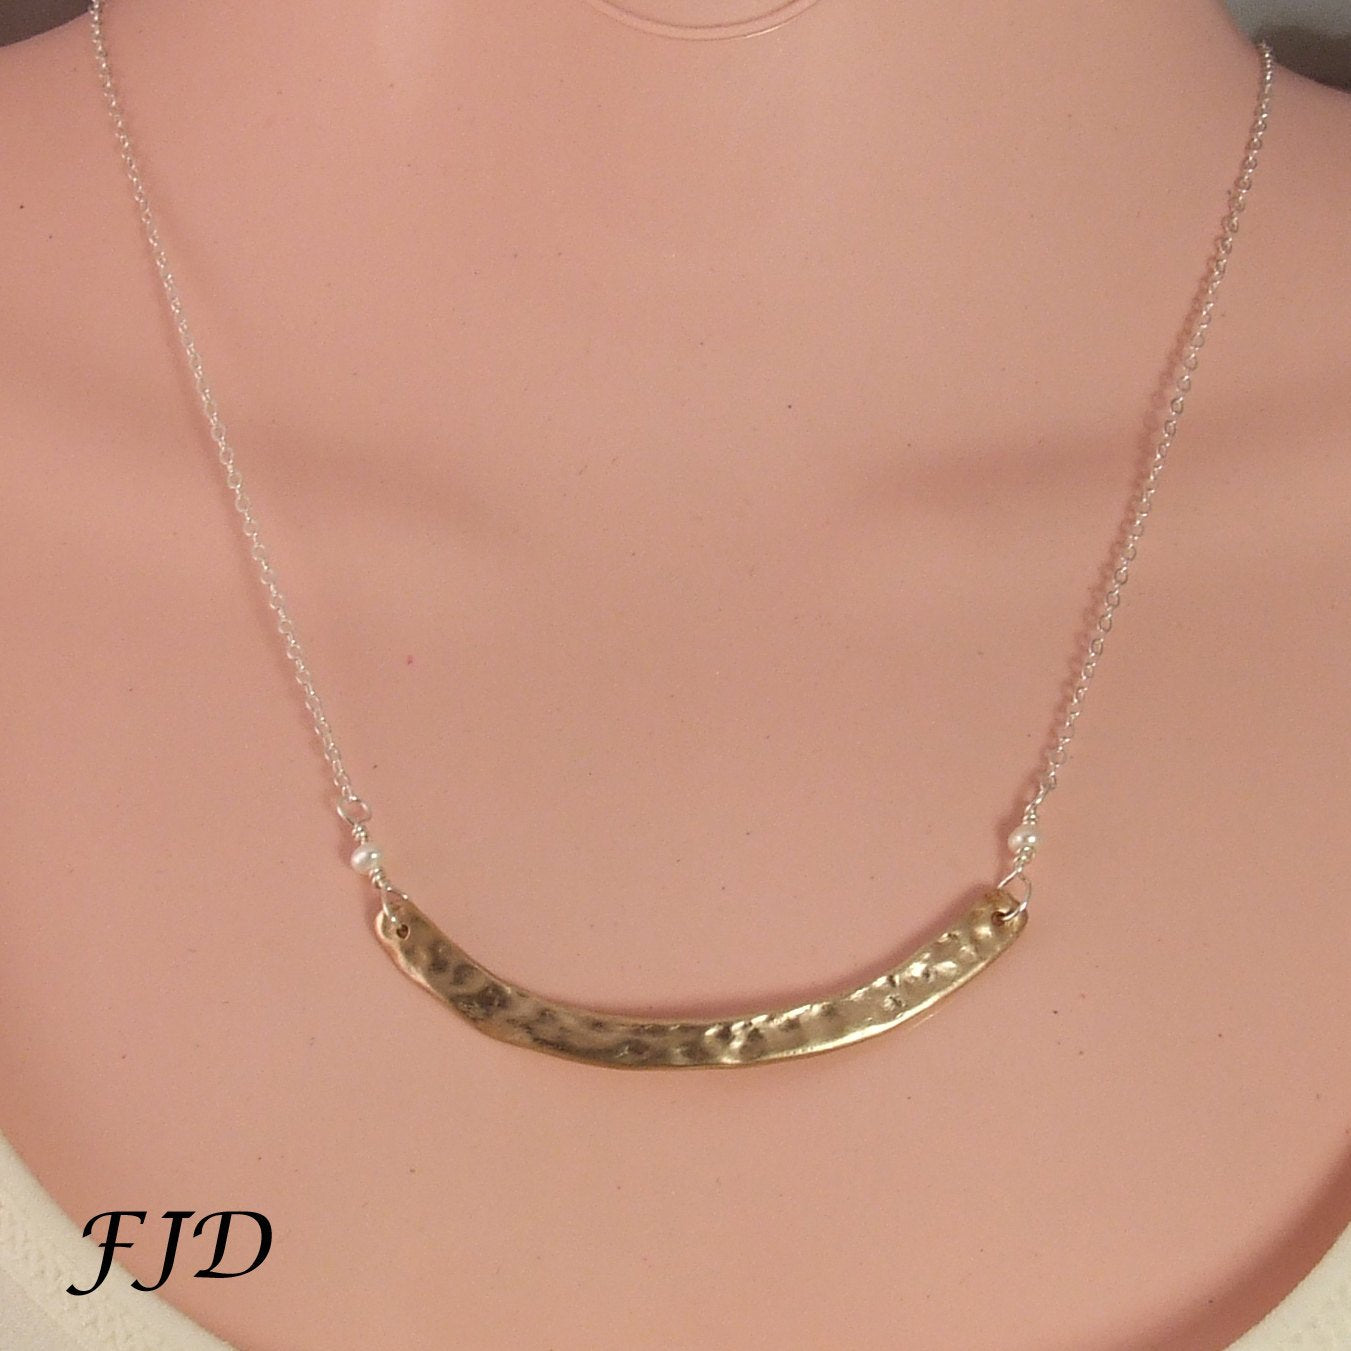 Handmade Bronze Curved Bar and Sterling Silver Necklace